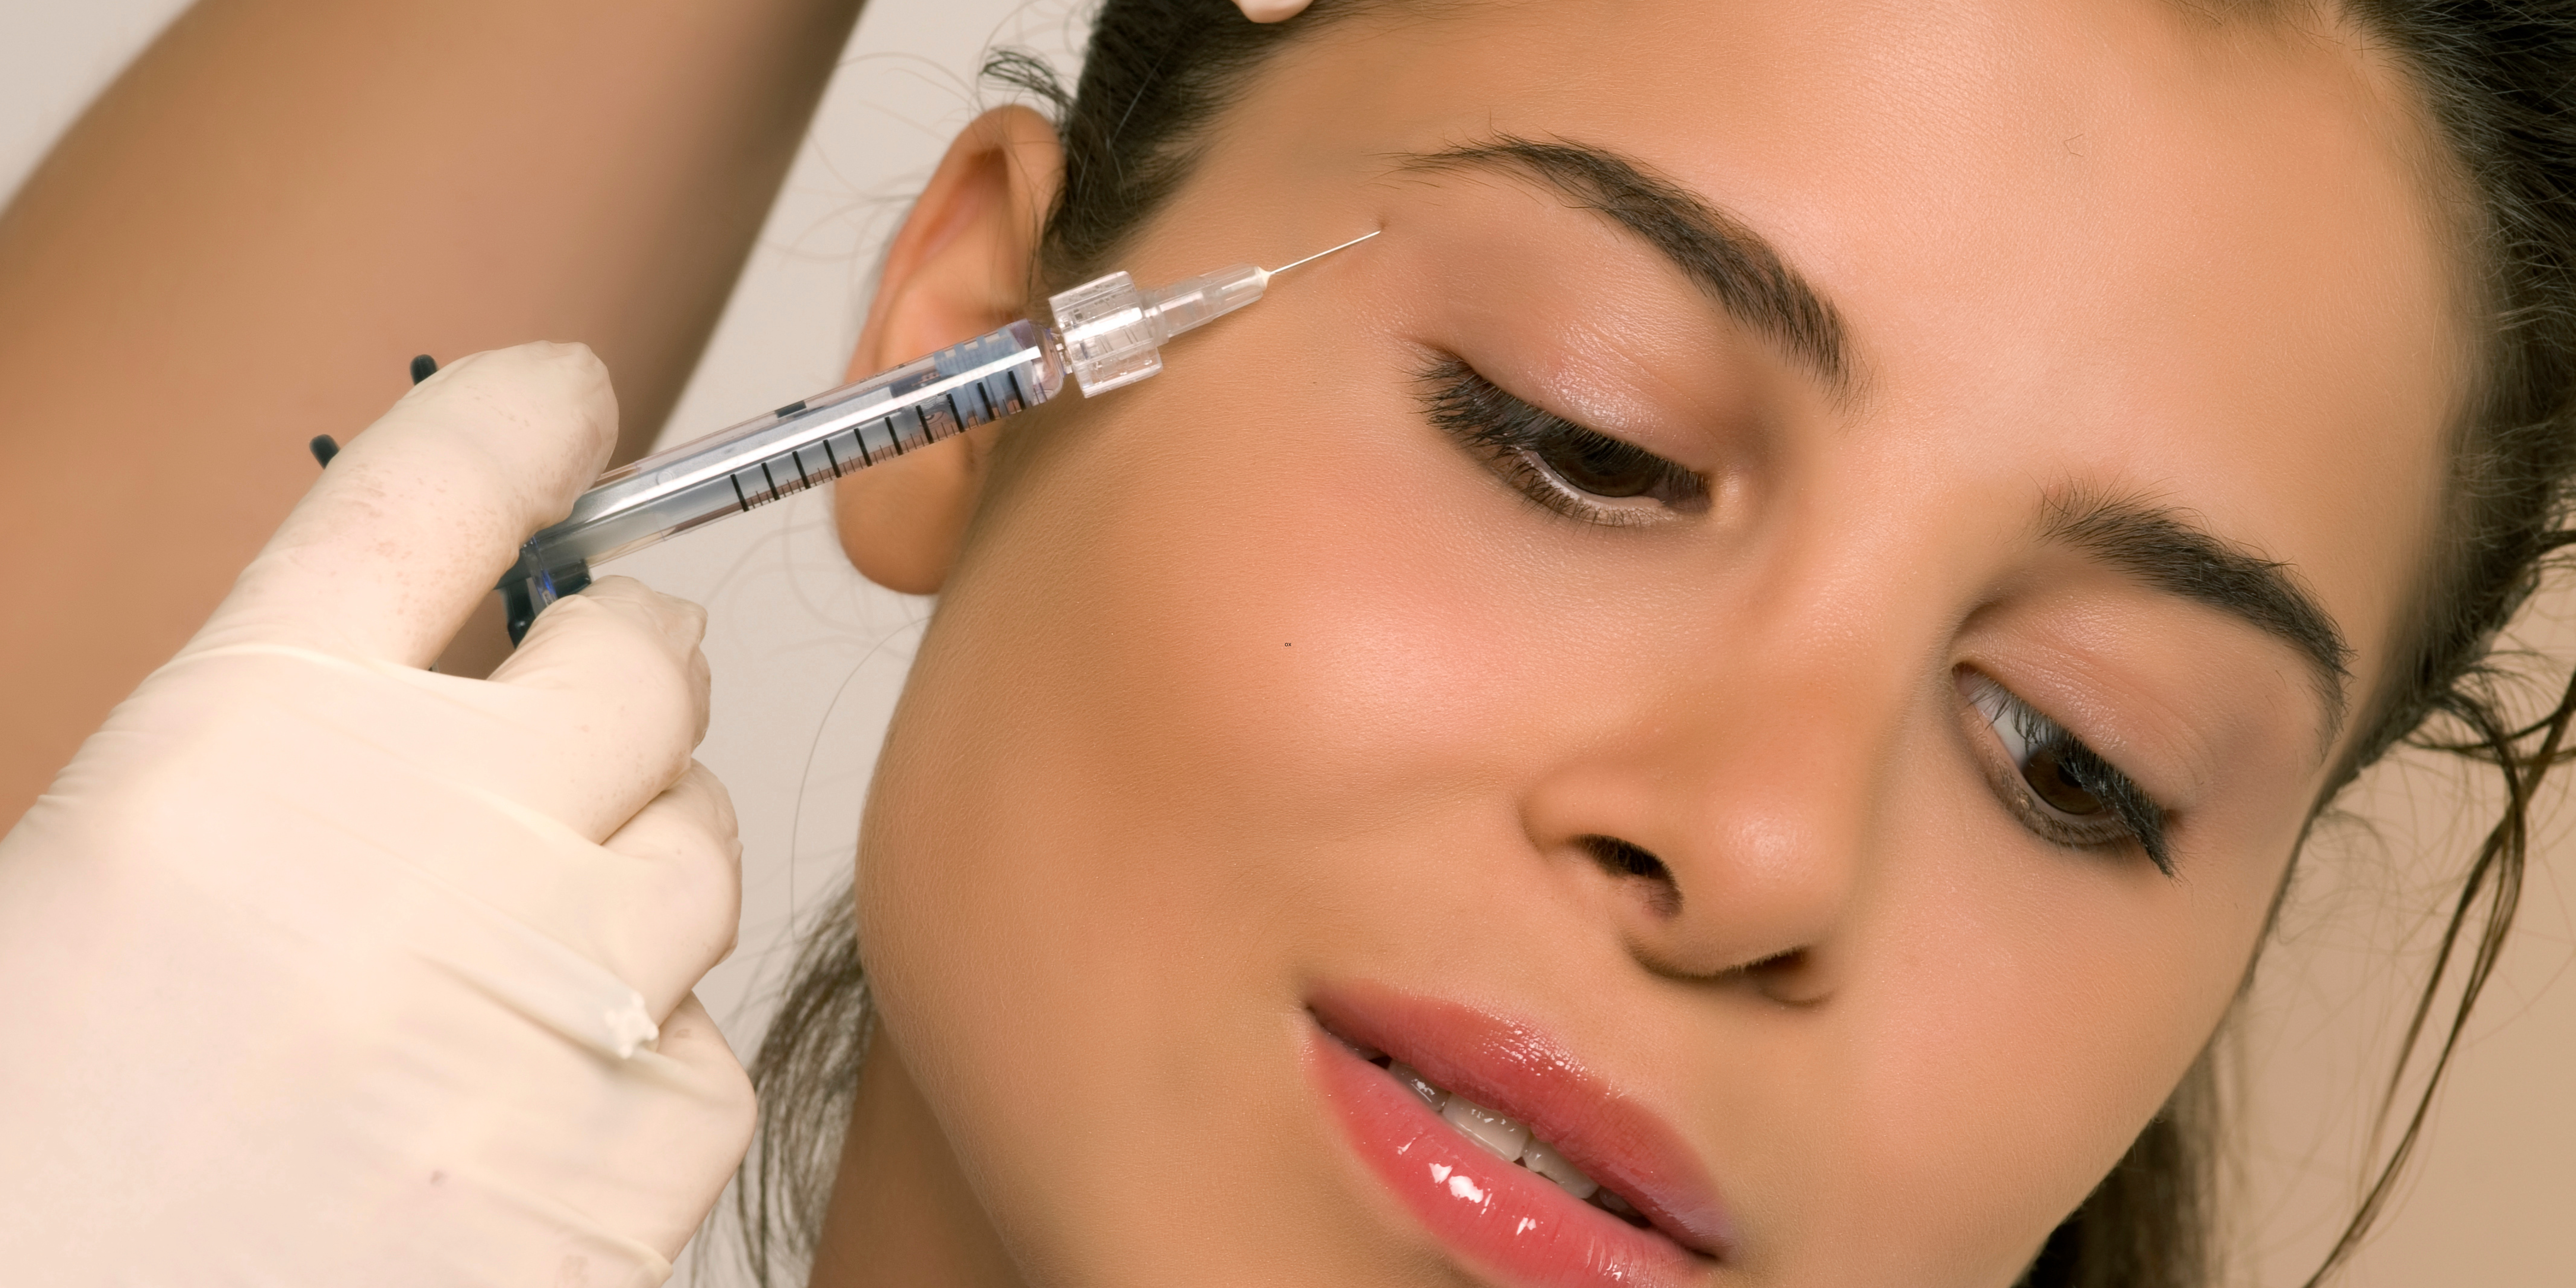 How to Find the Best Botox Doctor Near Mercersburg Now